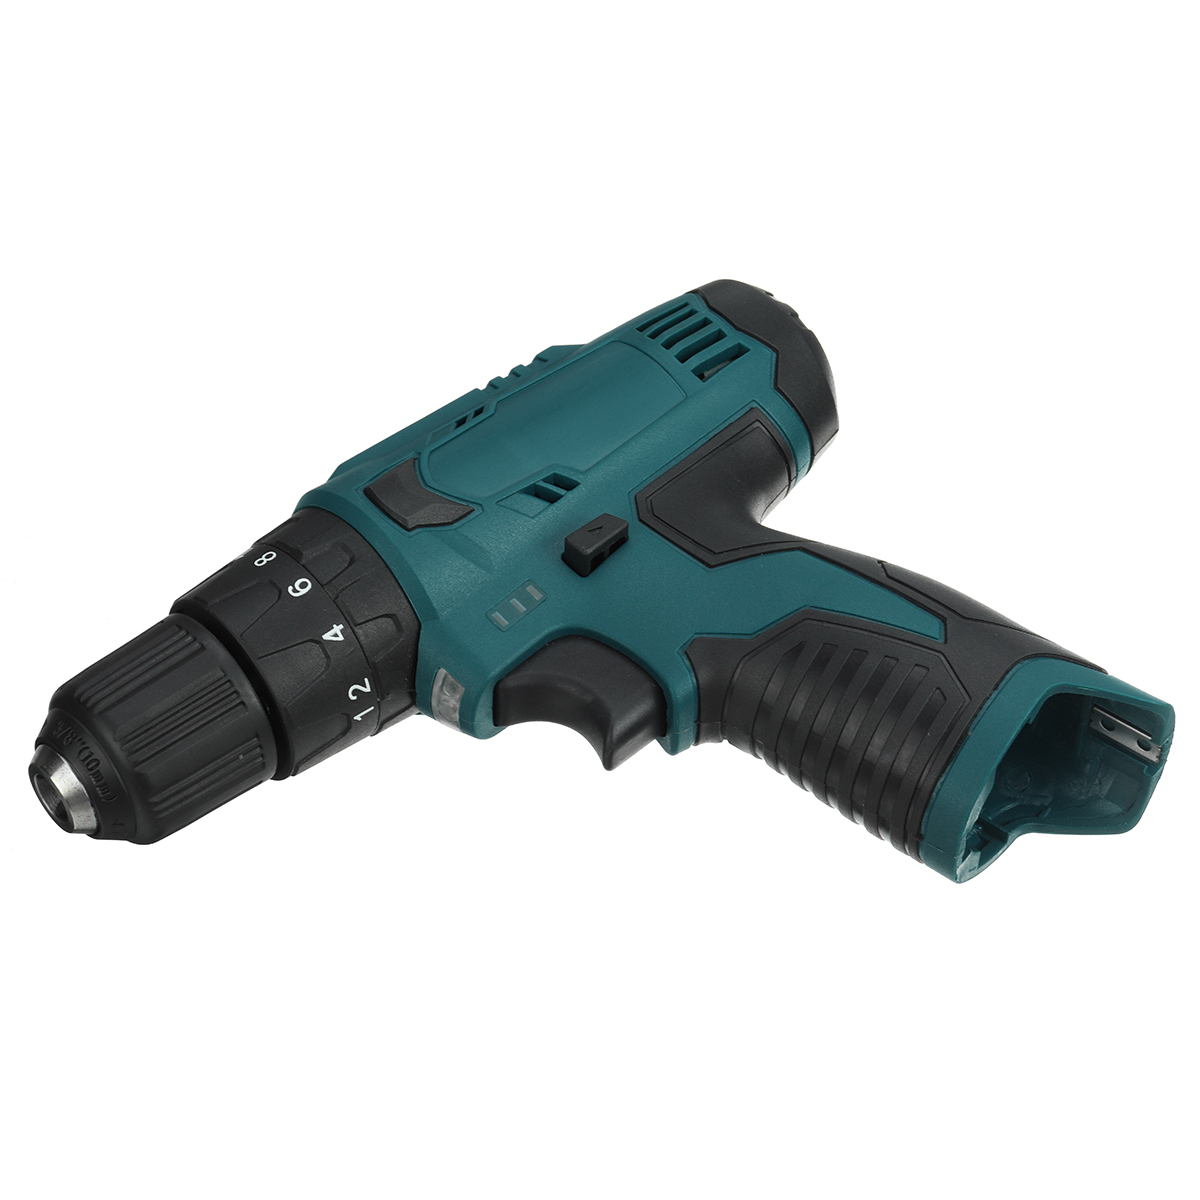 12V-1500mAh-3-IN-1-2-Speed-Cordless-Drill-Driver-Electric-Screwdriver-Hammer-Flat-Drill-183-Torque-1-1868432-7